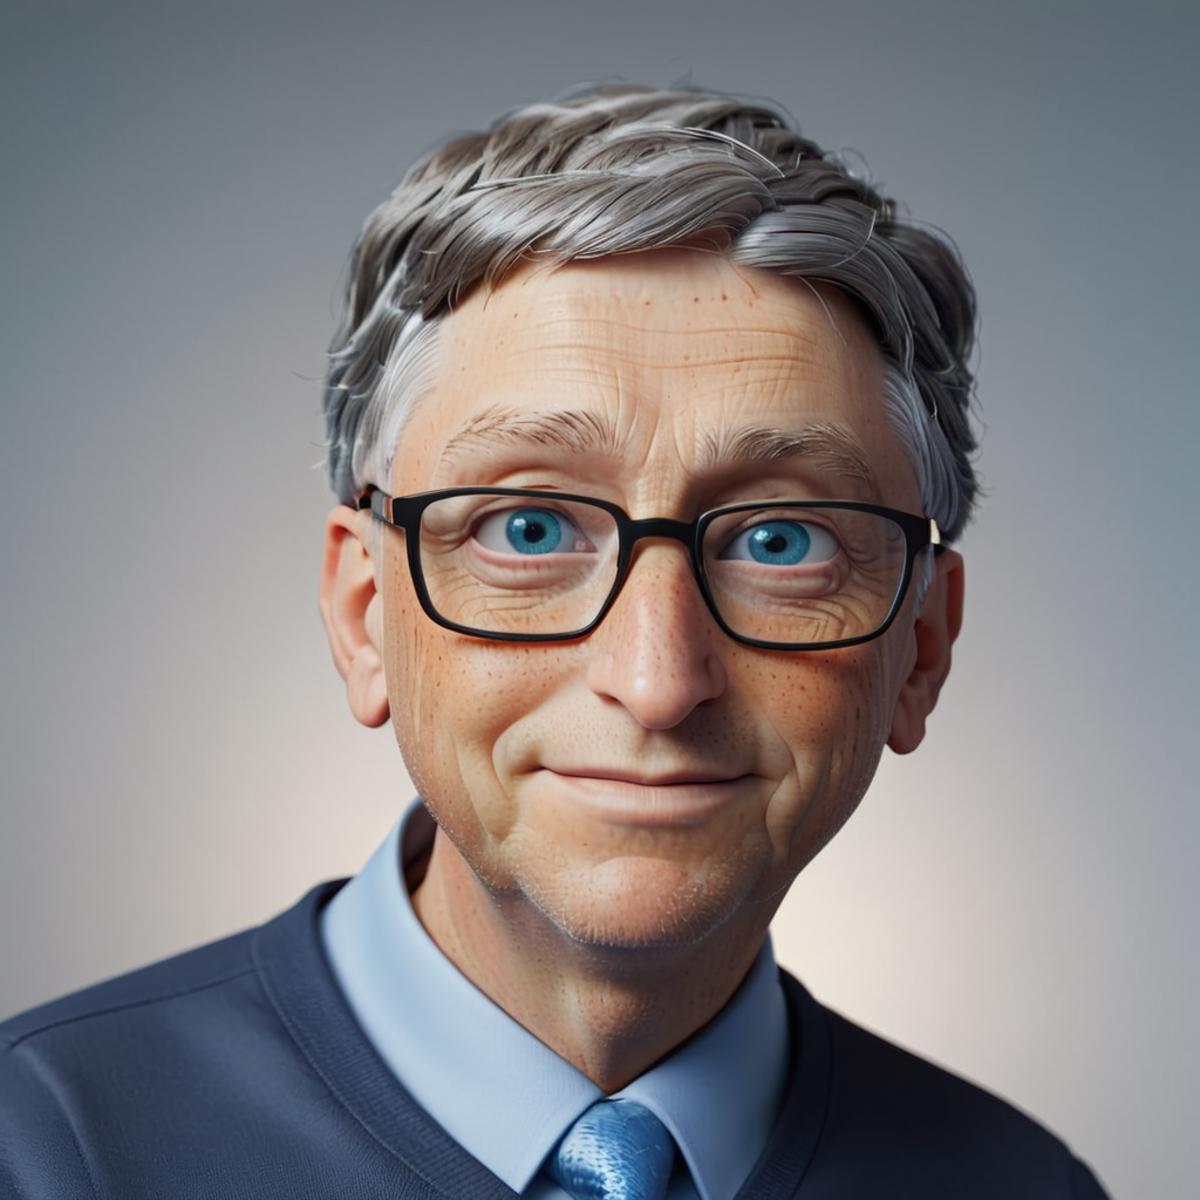 A 3D animated image of a man wearing glasses and a blue shirt.